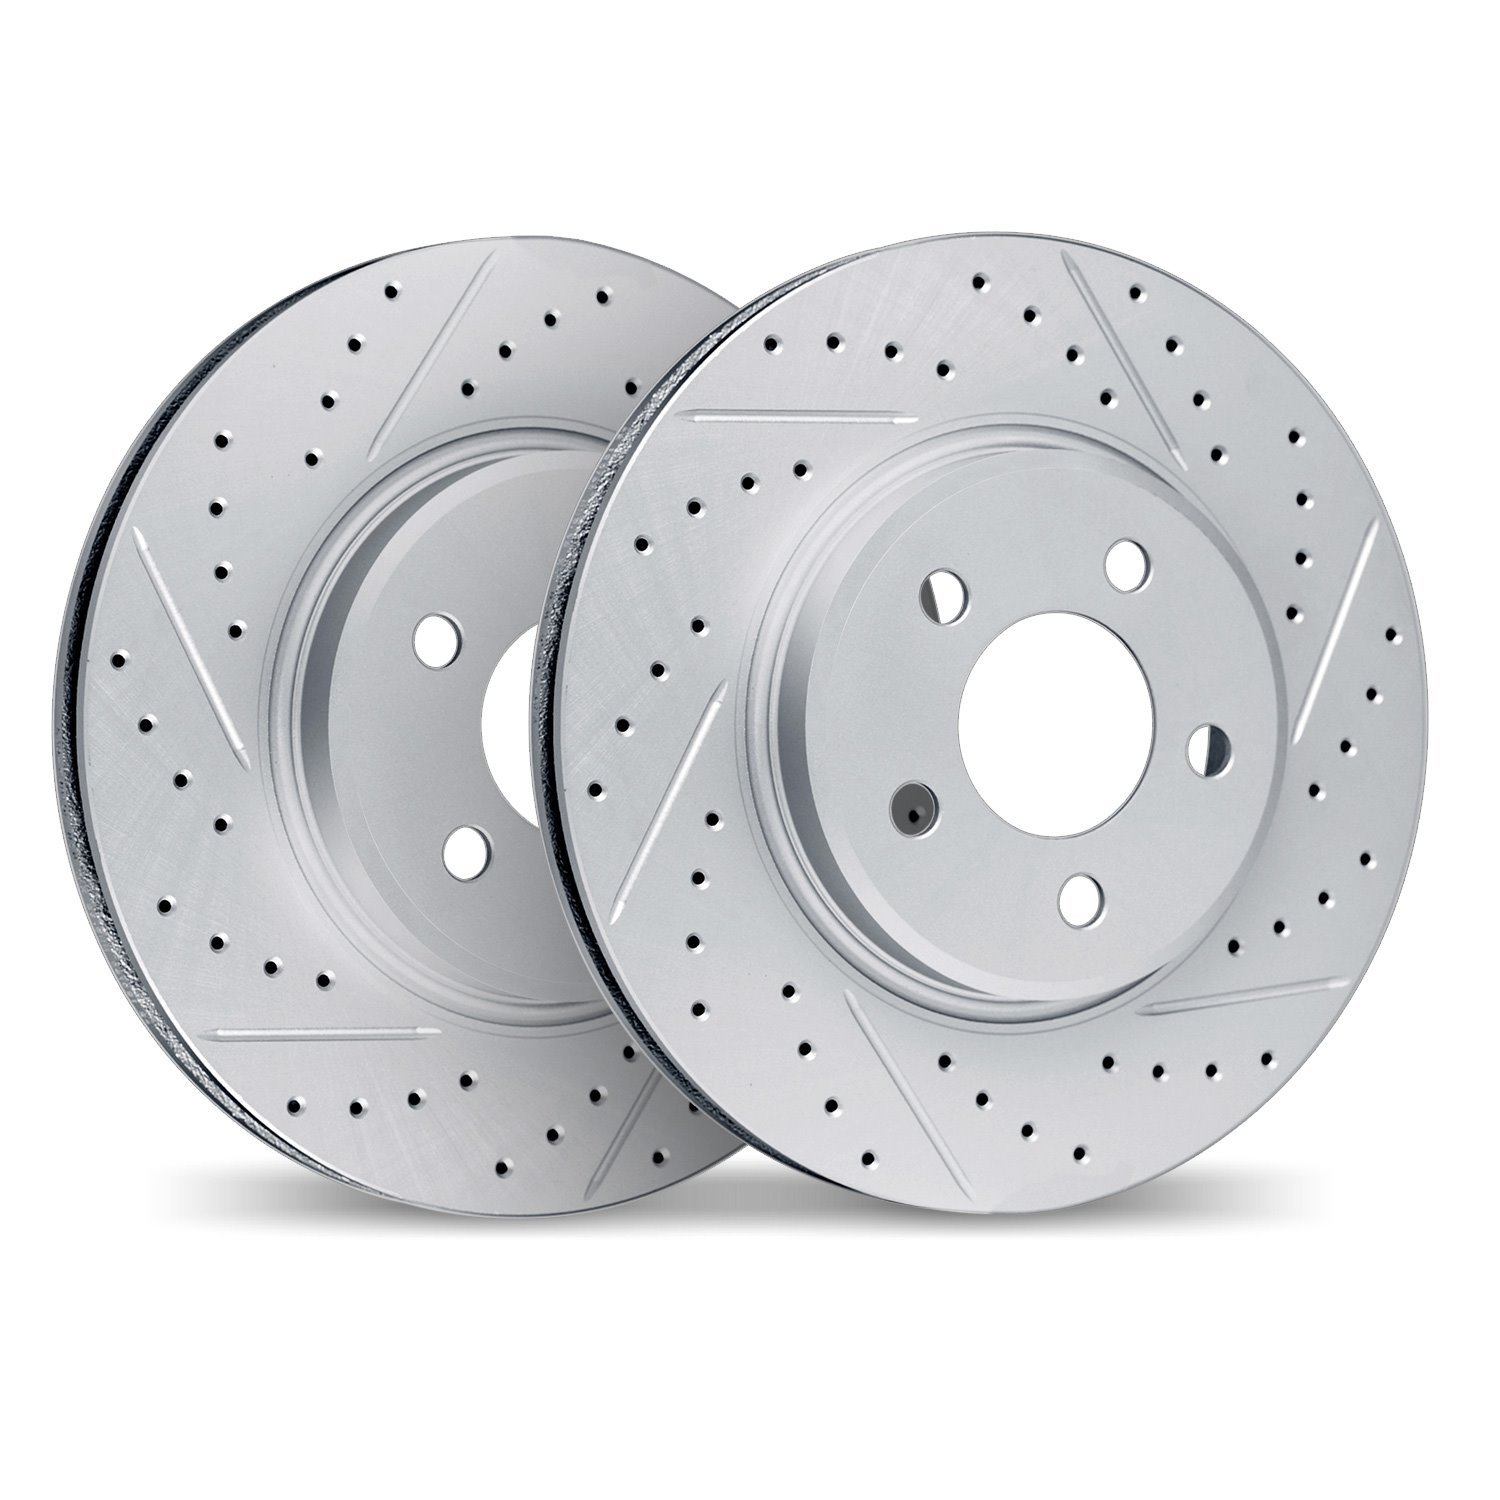 2002-47022 Geoperformance Drilled/Slotted Brake Rotors, 2014-2019 GM, Position: Front